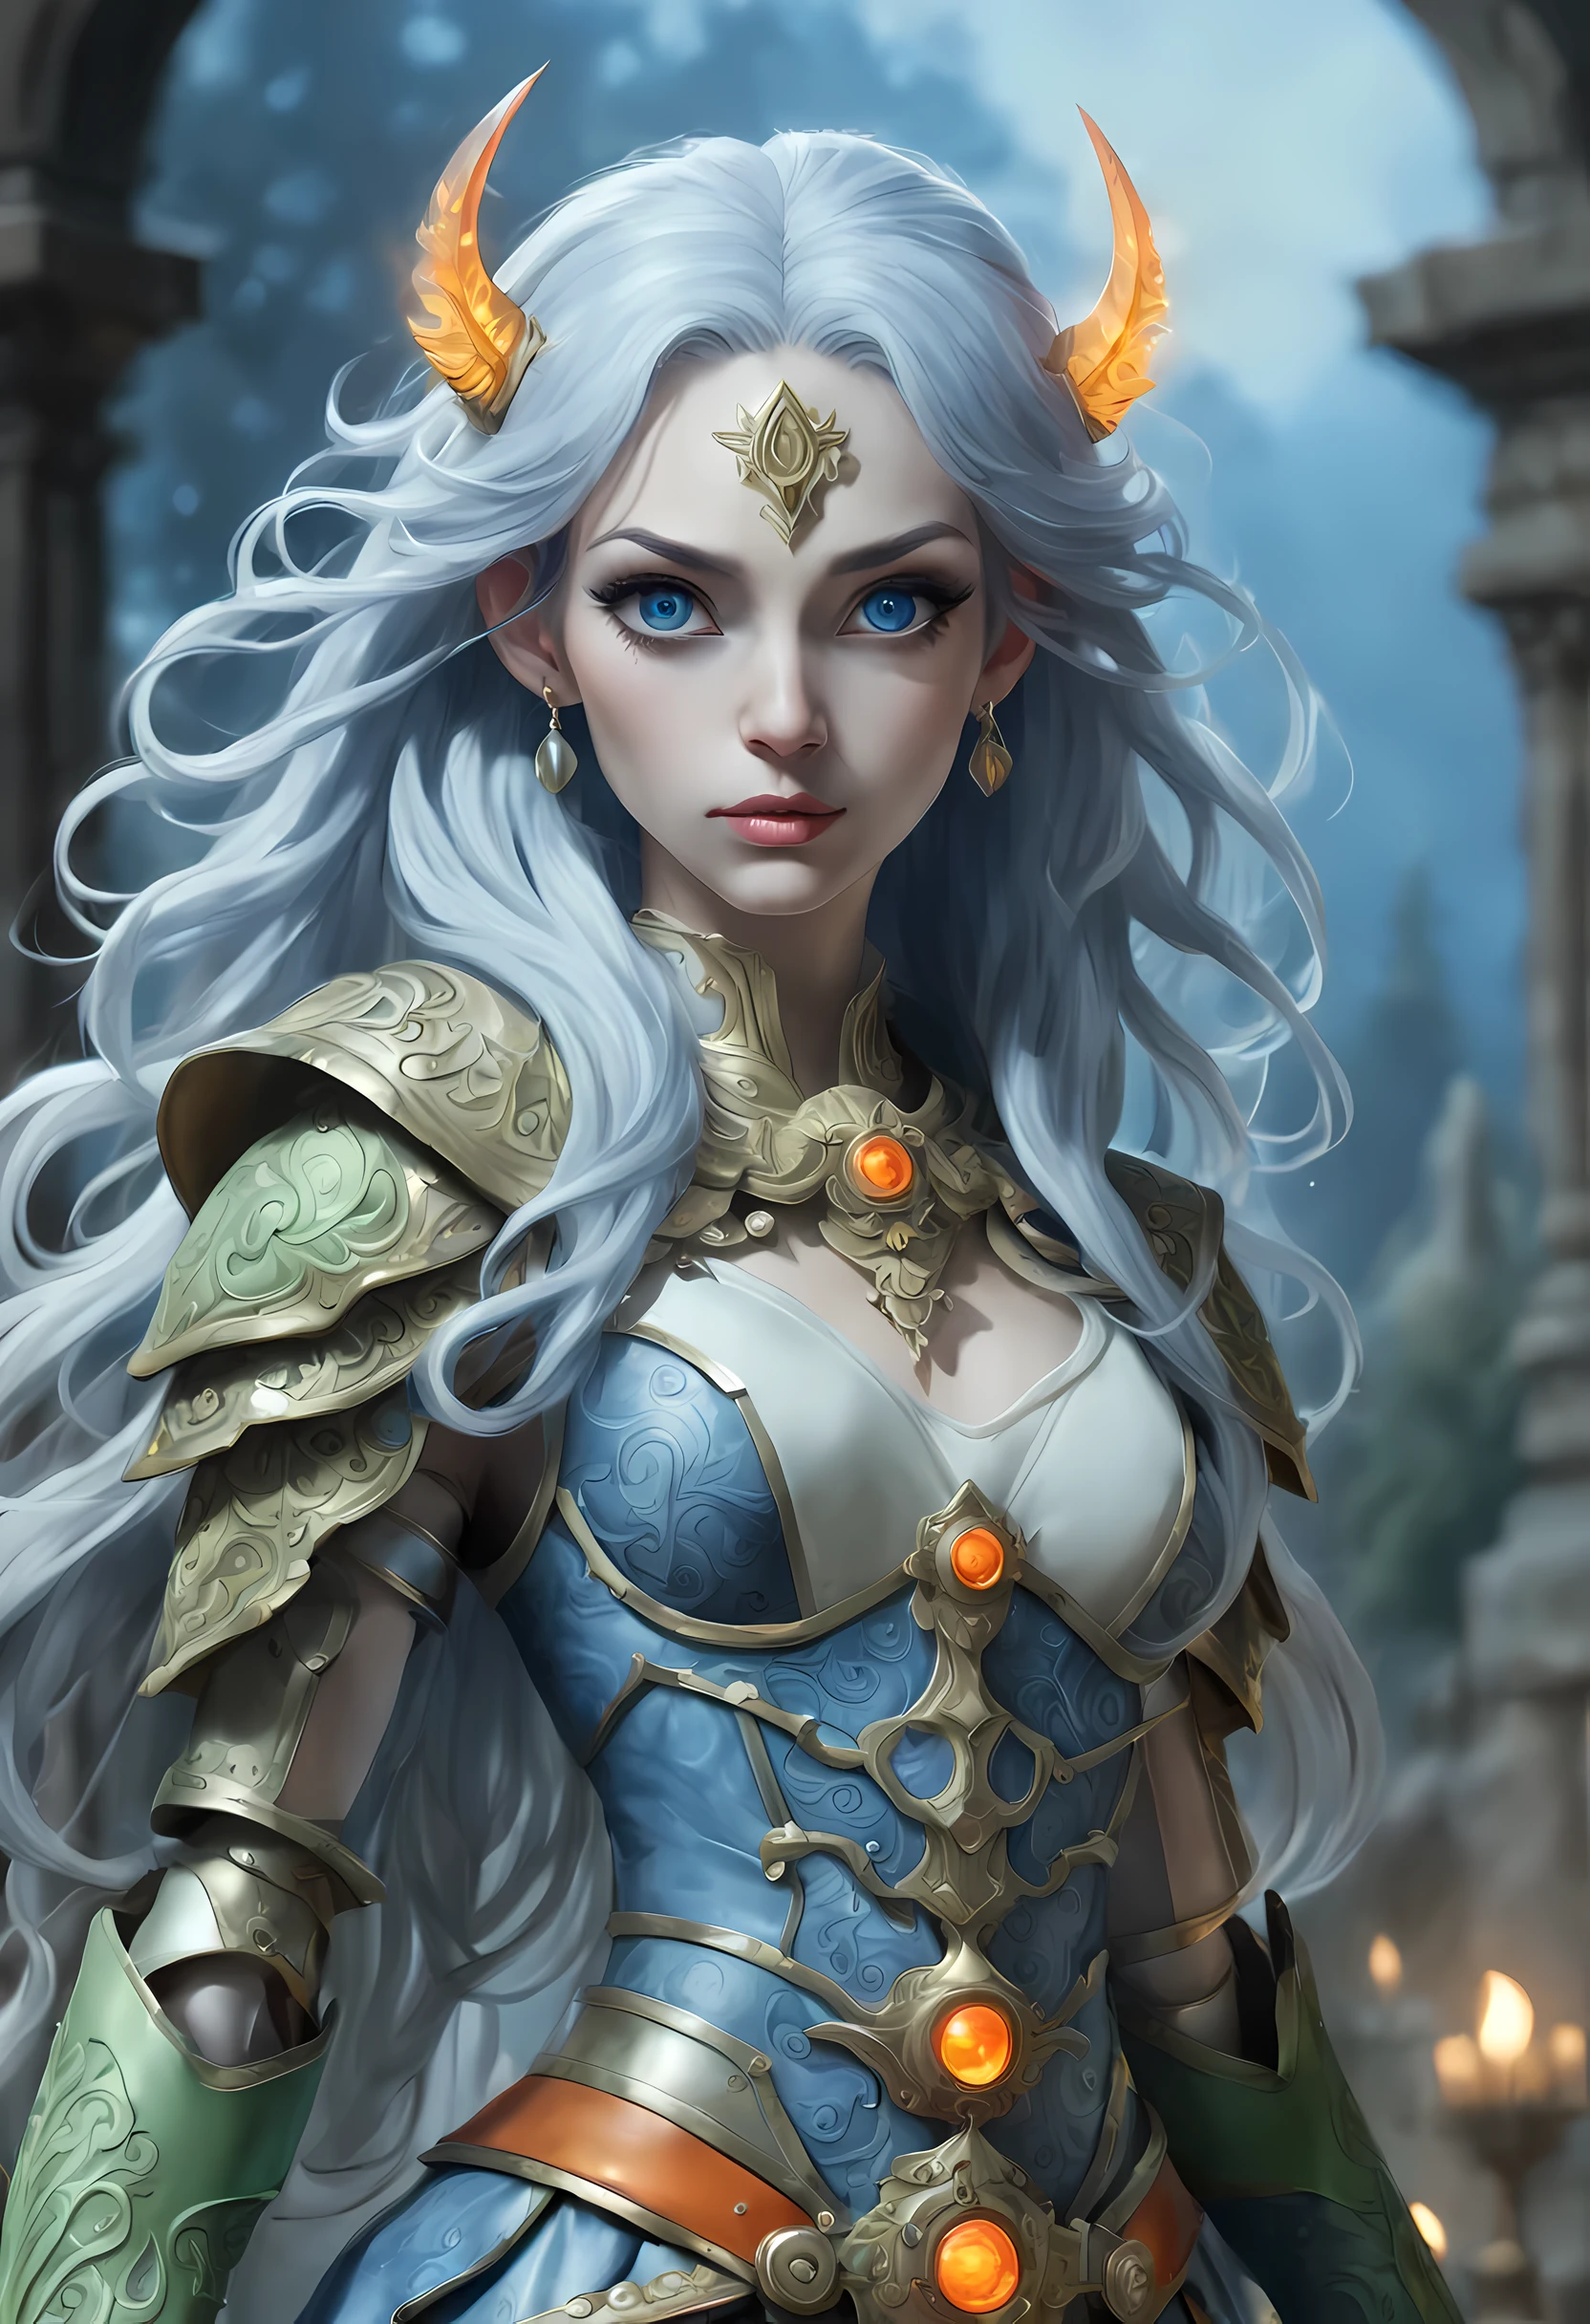 fantasy art, dnd art, RPG art, wide shot, (masterpiece: 1.4) a (portrait: 1.3) intense details, highly detailed, photorealistic, best quality, highres, portrait a female (fantasy art, Masterpiece, best quality: 1.3) ((blue skin: 1.5)), intense details facial details, exquisite beauty, (fantasy art, Masterpiece, best quality) cleric, (blue: 1.3) skinned female, white hair, long hair, (hair hides ears: 1.5), (green: 1.3) eye, fantasy art, Masterpiece, best quality) armed a fiery sword red fire, wearing heavy (white: 1.3) half plate mail armor, wearing high heeled laced boots, wearing an(orange :1.3) cloak, wearing glowing holy symbol GlowingRunes_yellow, within fantasy temple background, reflection light, high details, best quality, 16k, [ultra detailed], masterpiece, best quality, (extremely detailed), close up, photorealistic, RAW, fantasy art, dnd art, fantasy art, realistic art,((best quality)), ((masterpiece)), (detailed), perfect face,